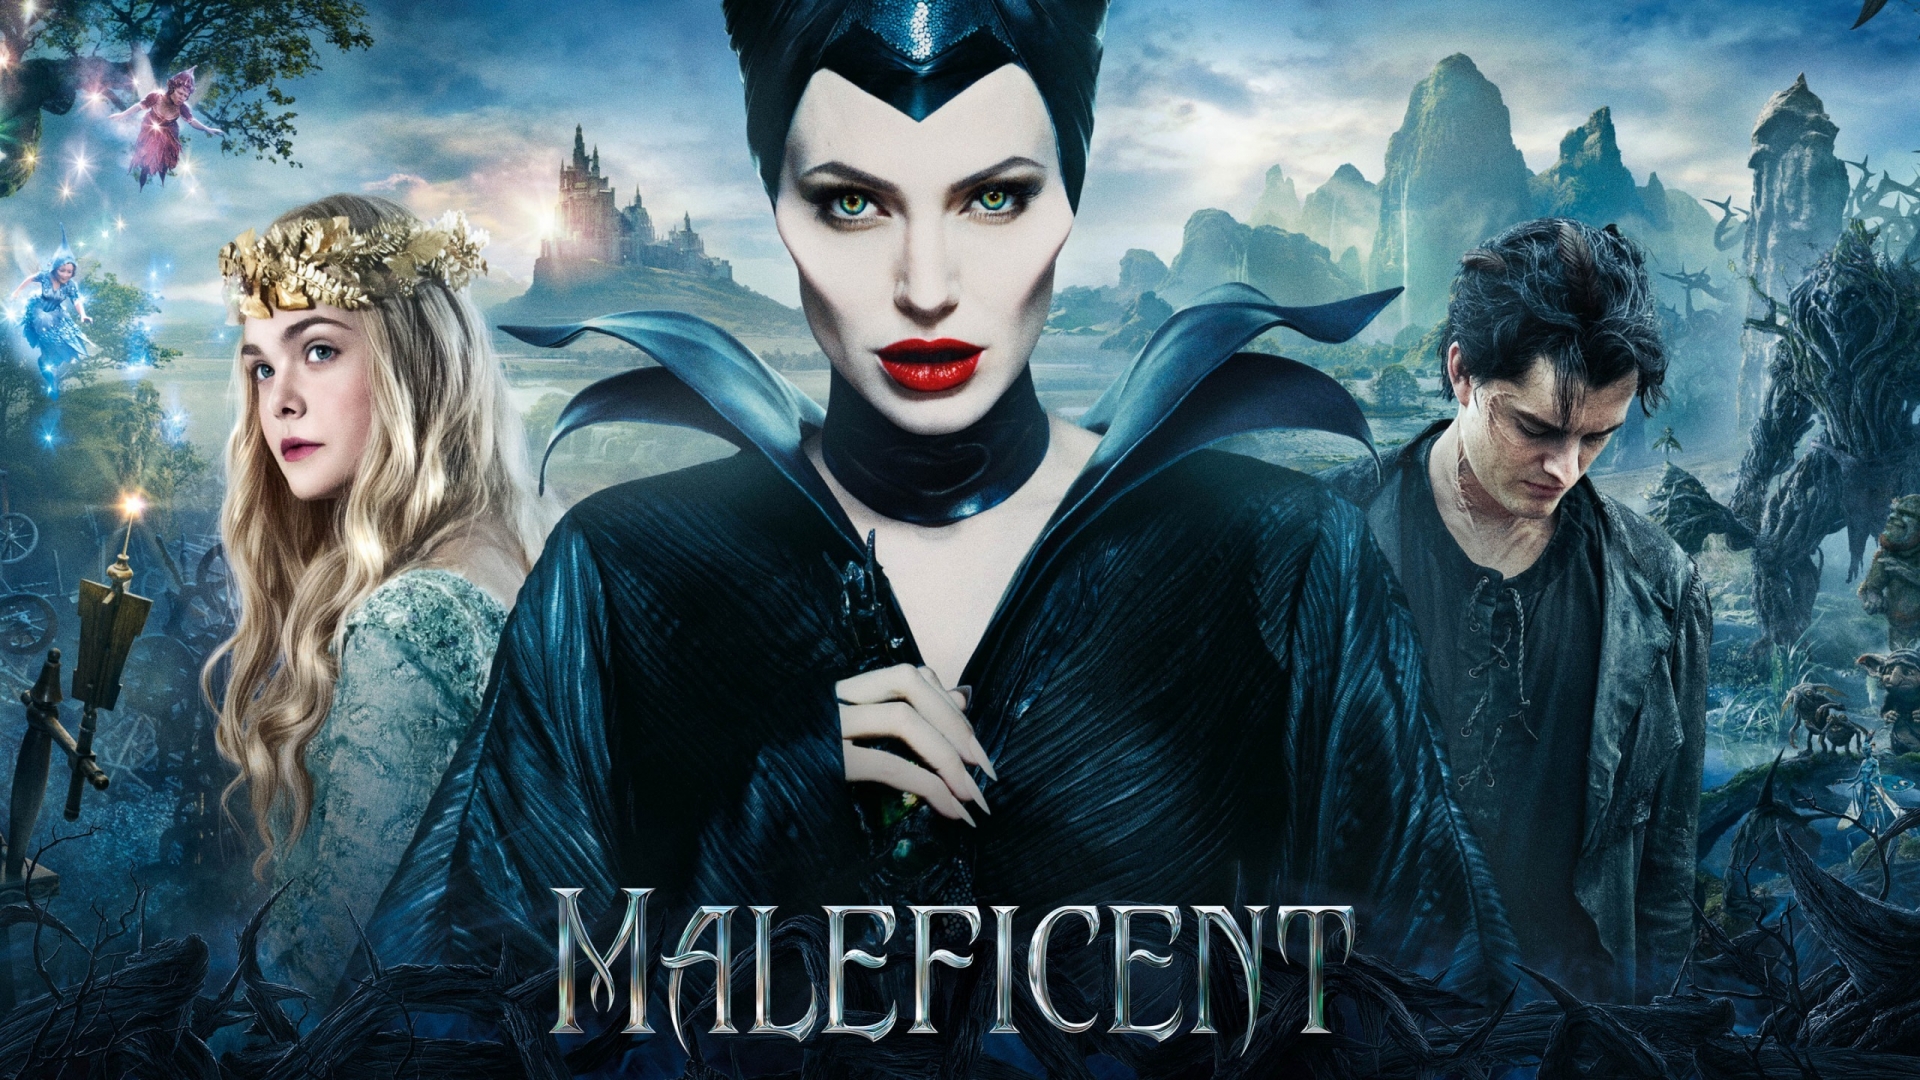 Maleficent Poster for 1920 x 1080 HDTV 1080p resolution